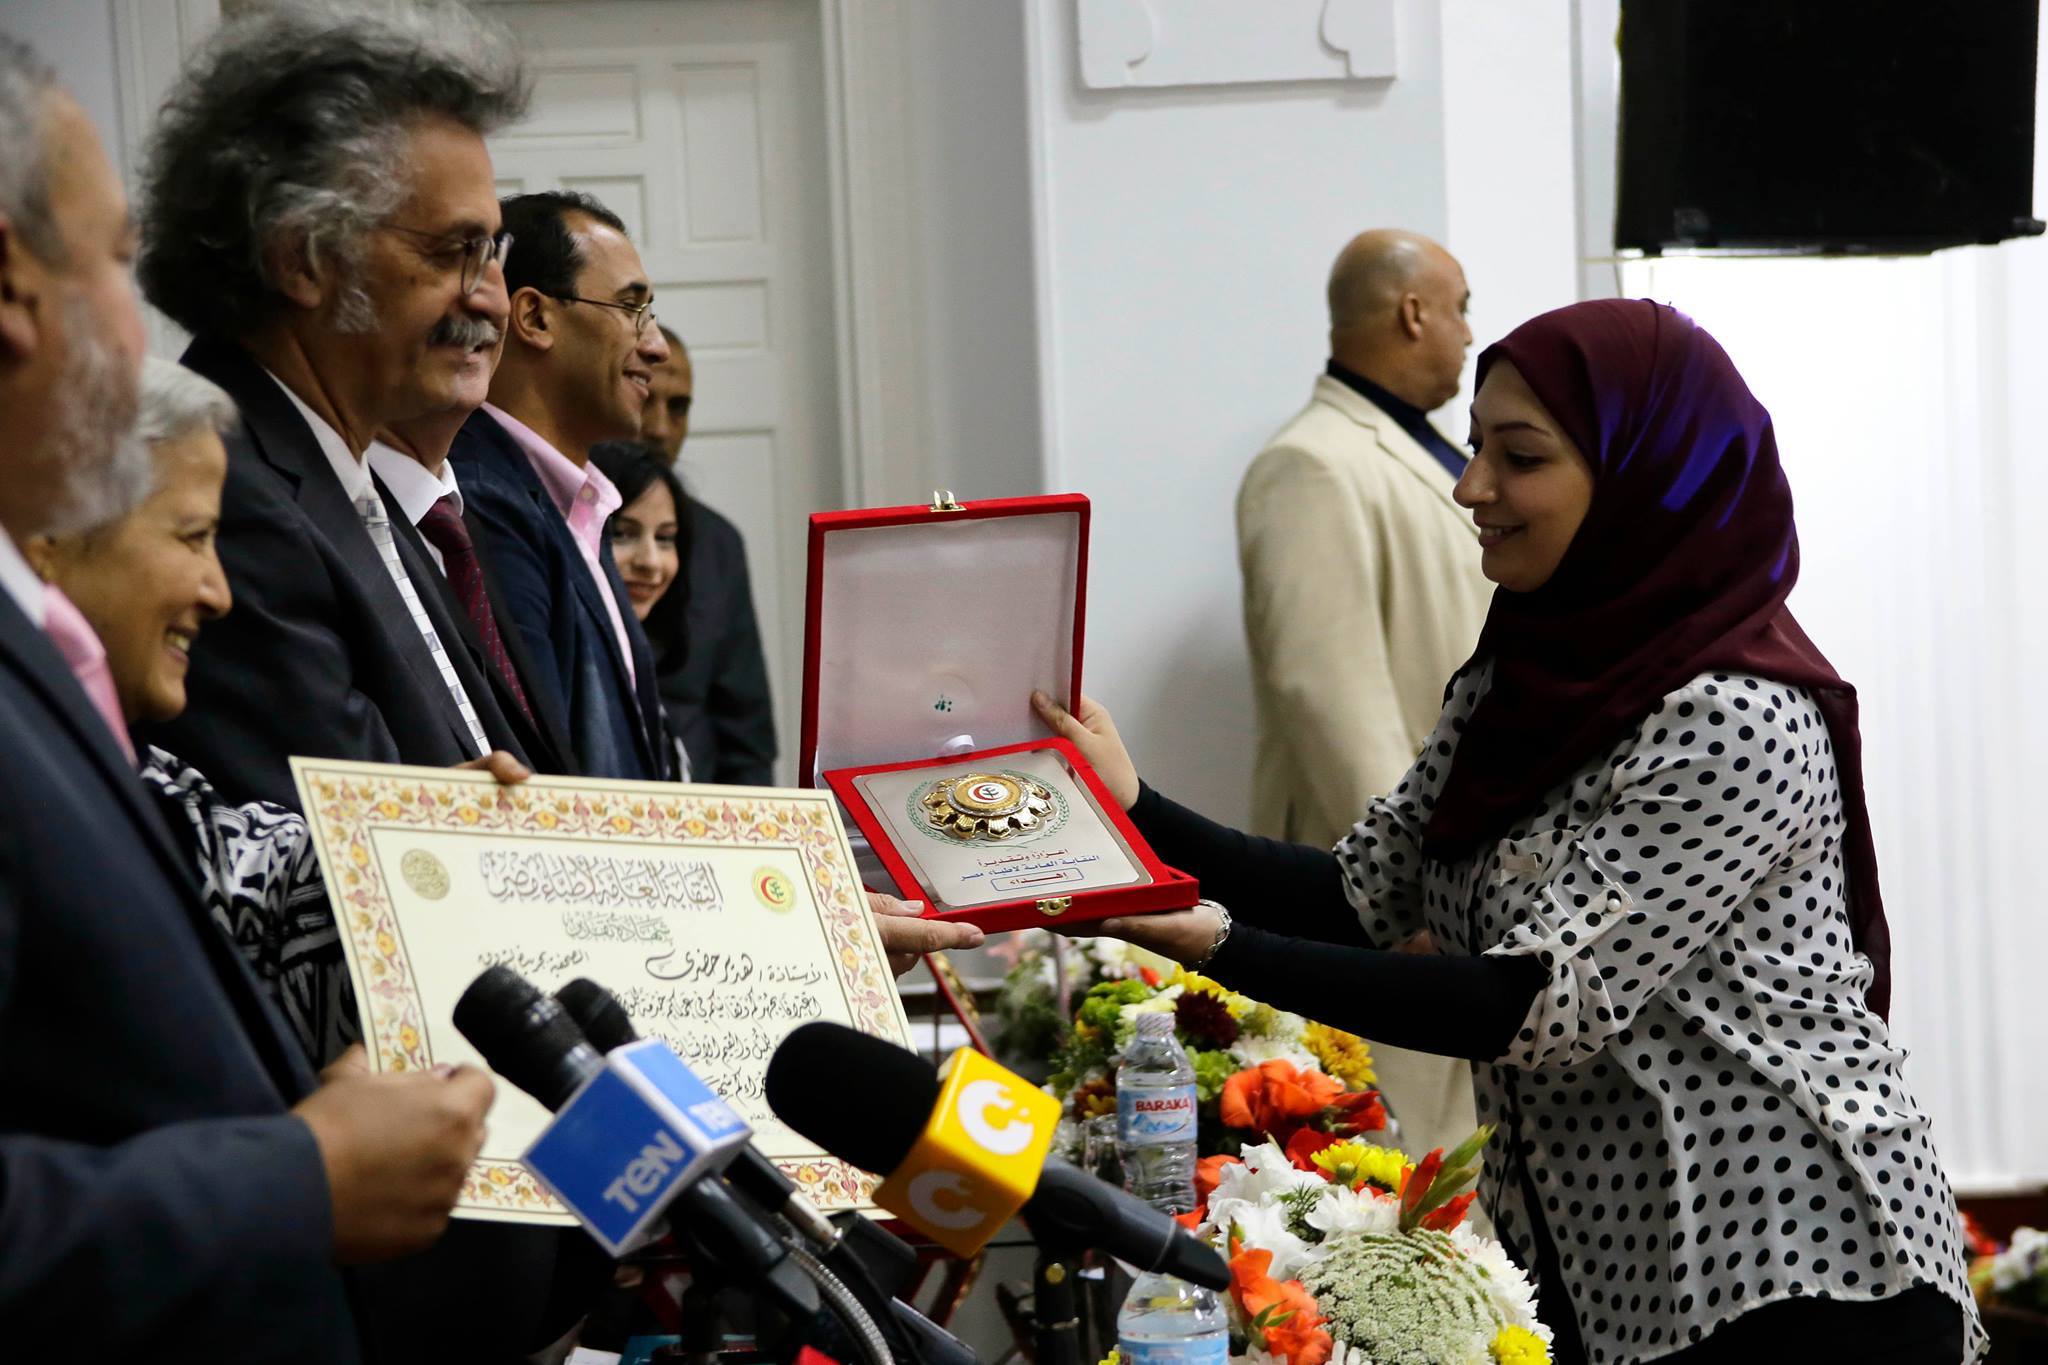 Hadeer ElHadary receiving an award from the Food and Agriculture Organization of the United Nations.